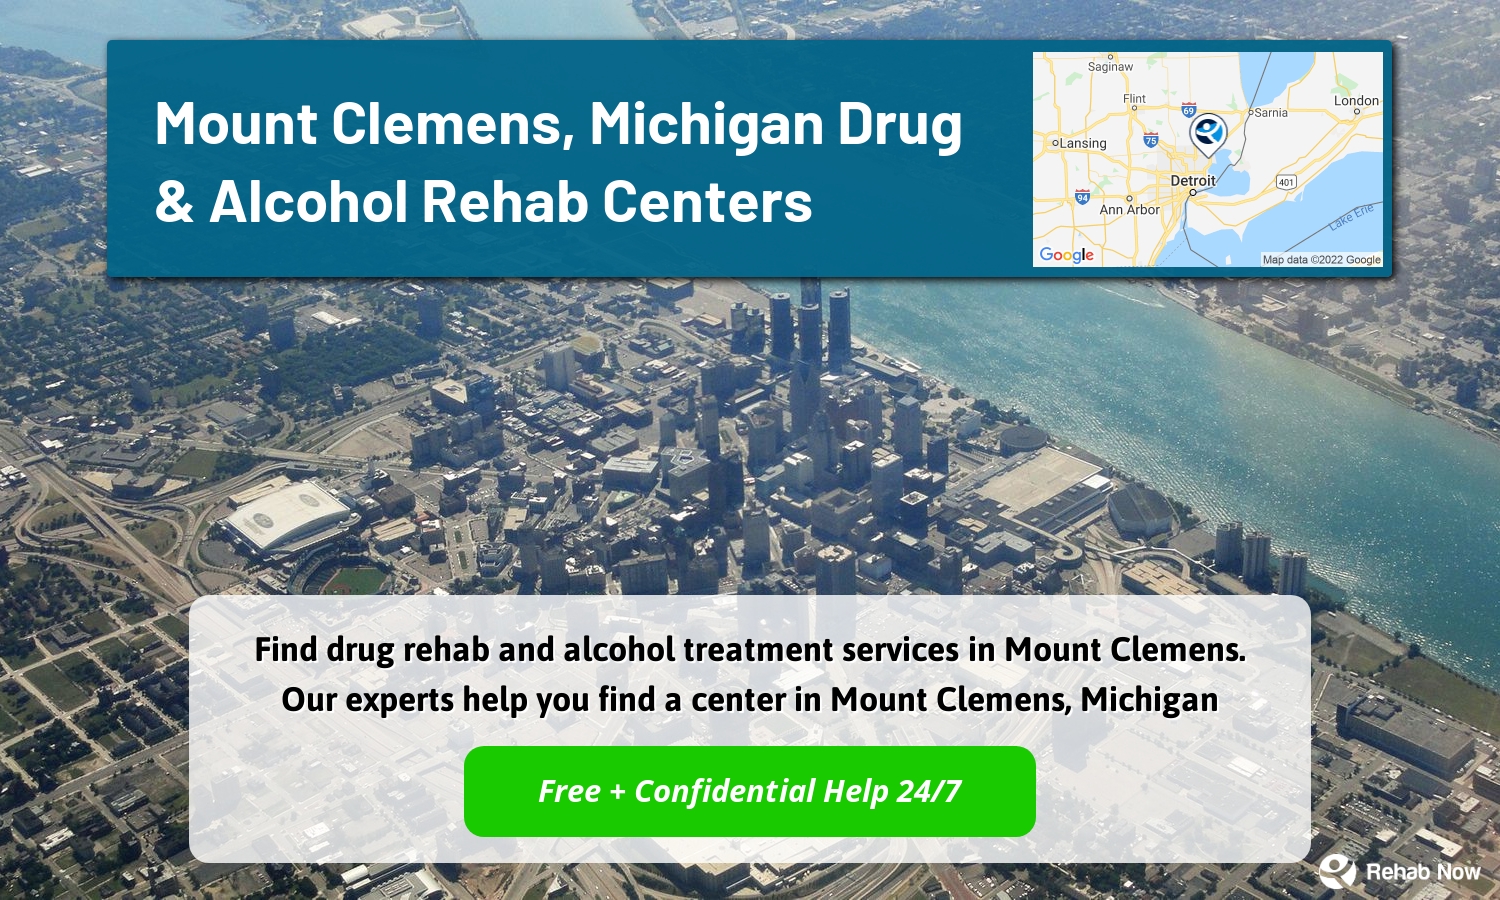 Find drug rehab and alcohol treatment services in Mount Clemens. Our experts help you find a center in Mount Clemens, Michigan